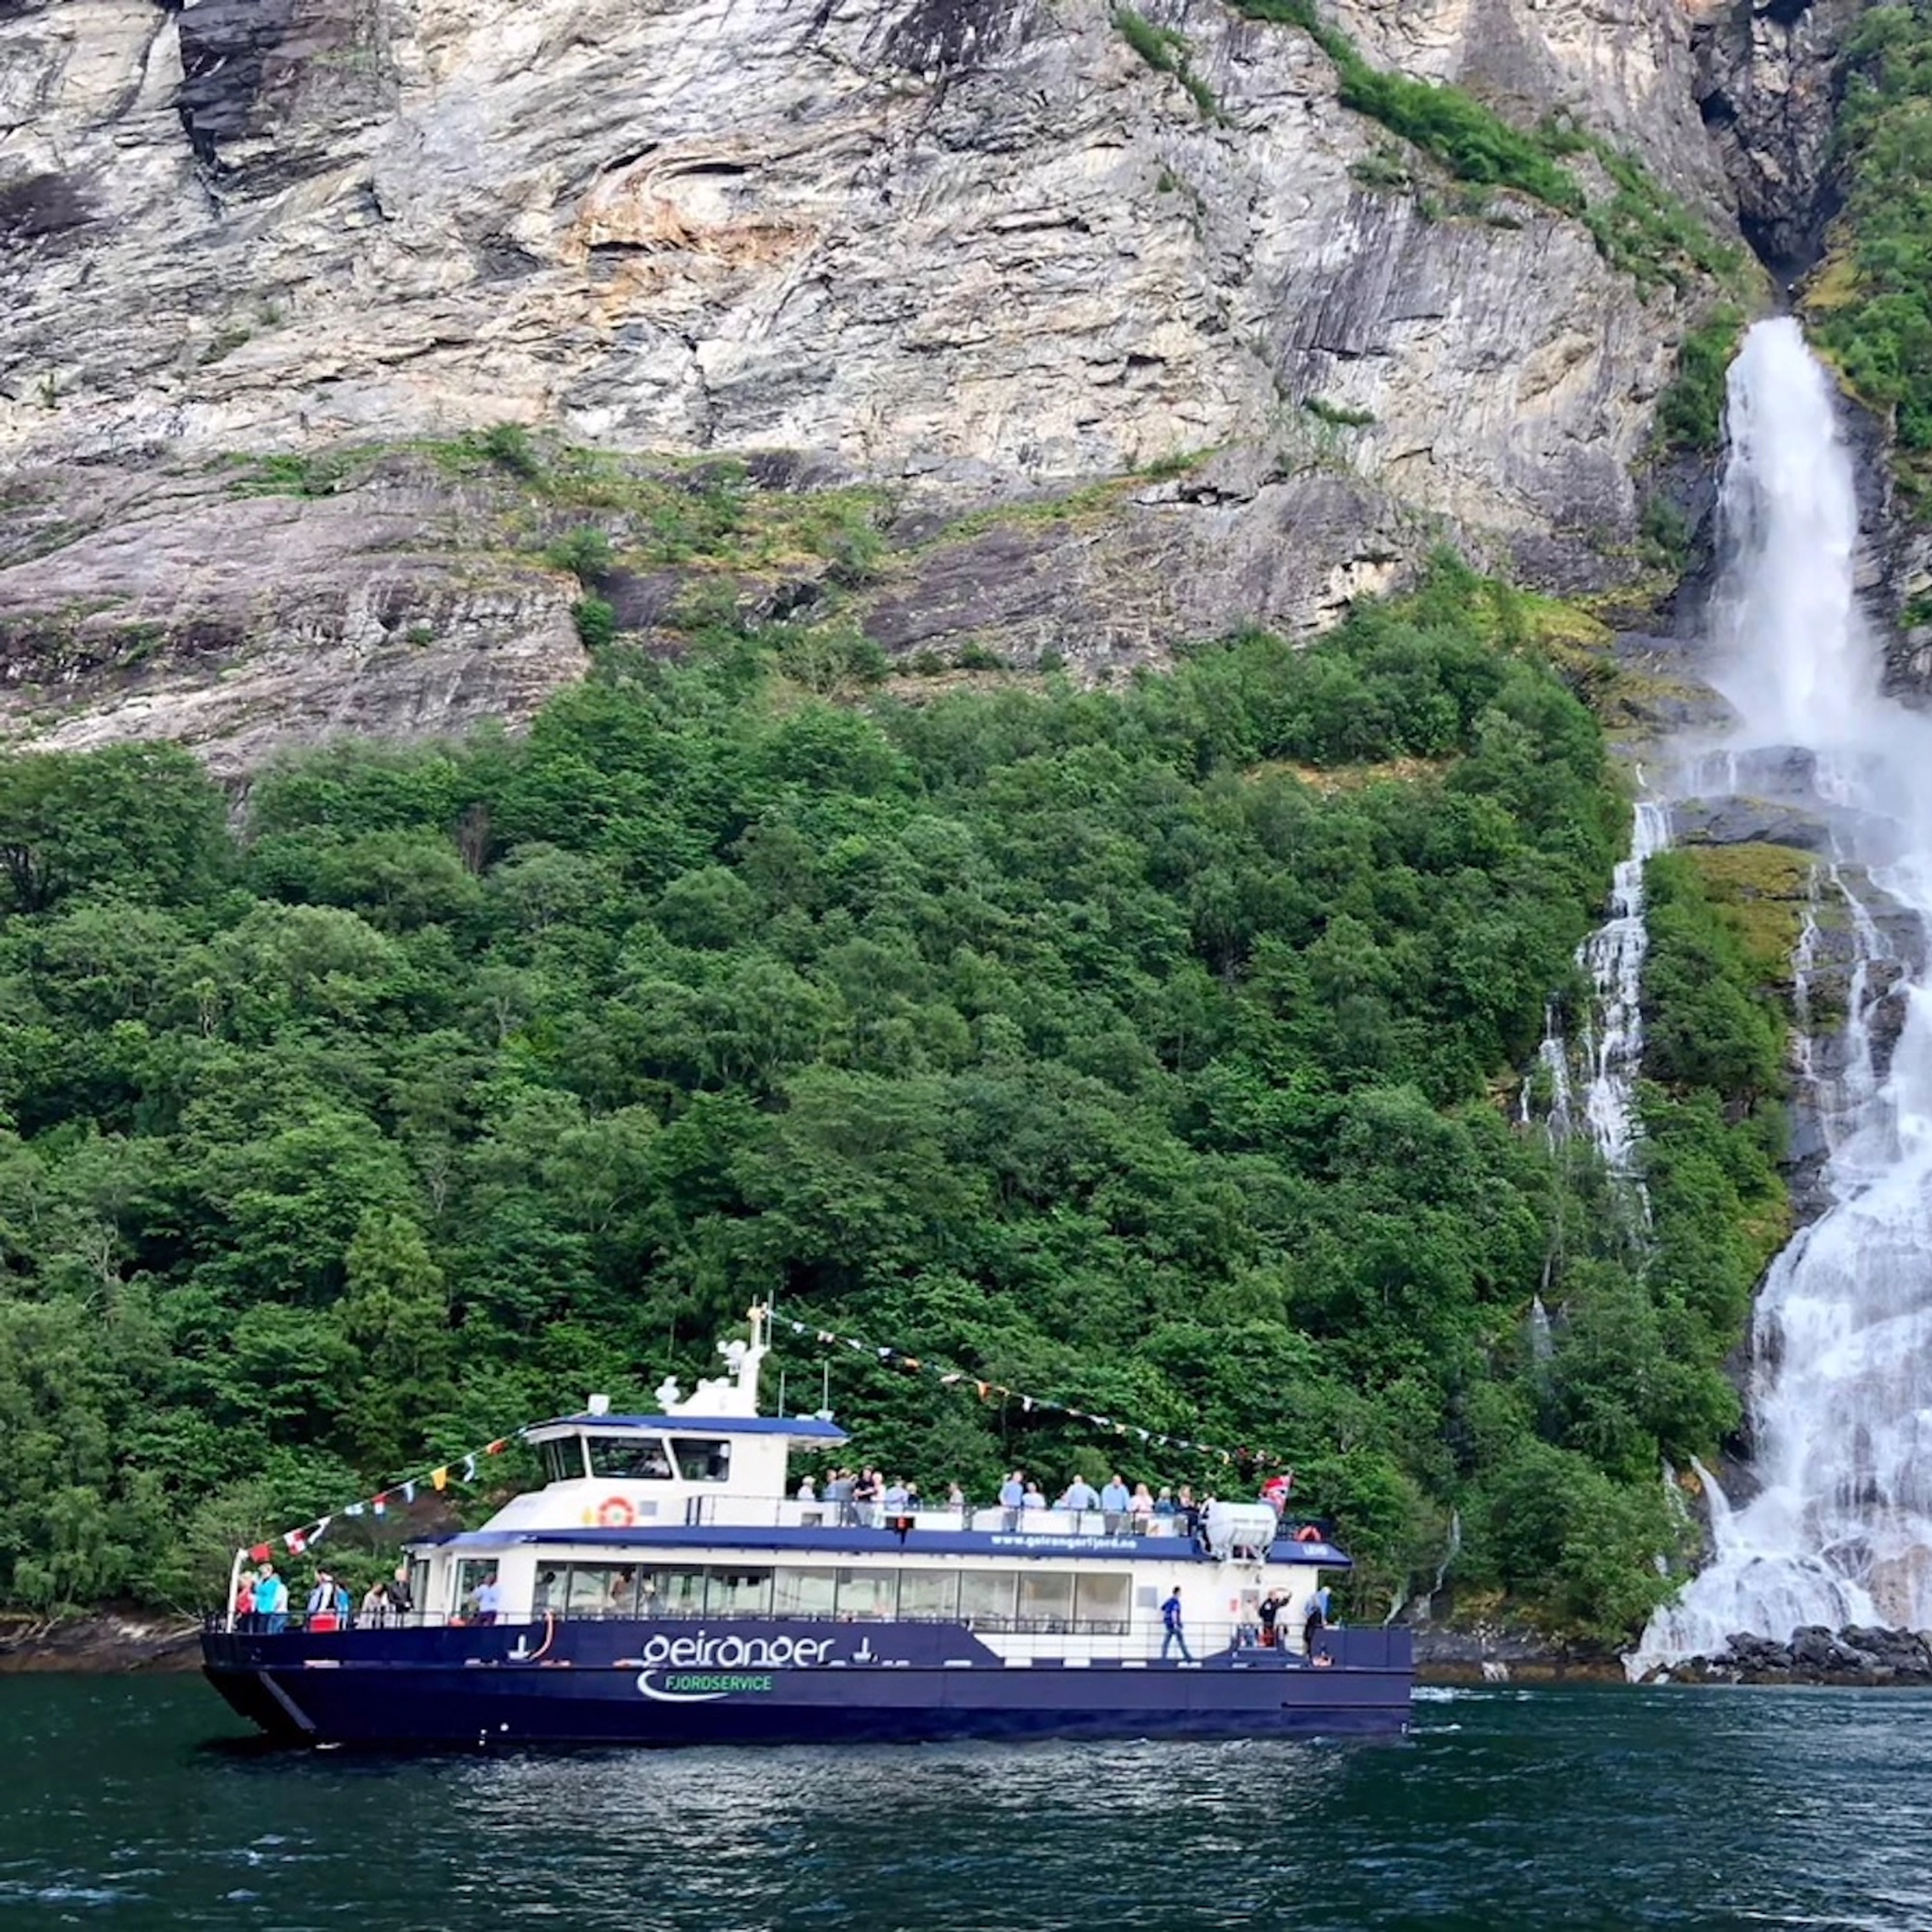 Passing by waterfalls - Fjord cruise on the Geirangerfjord - Ålesund, Norway